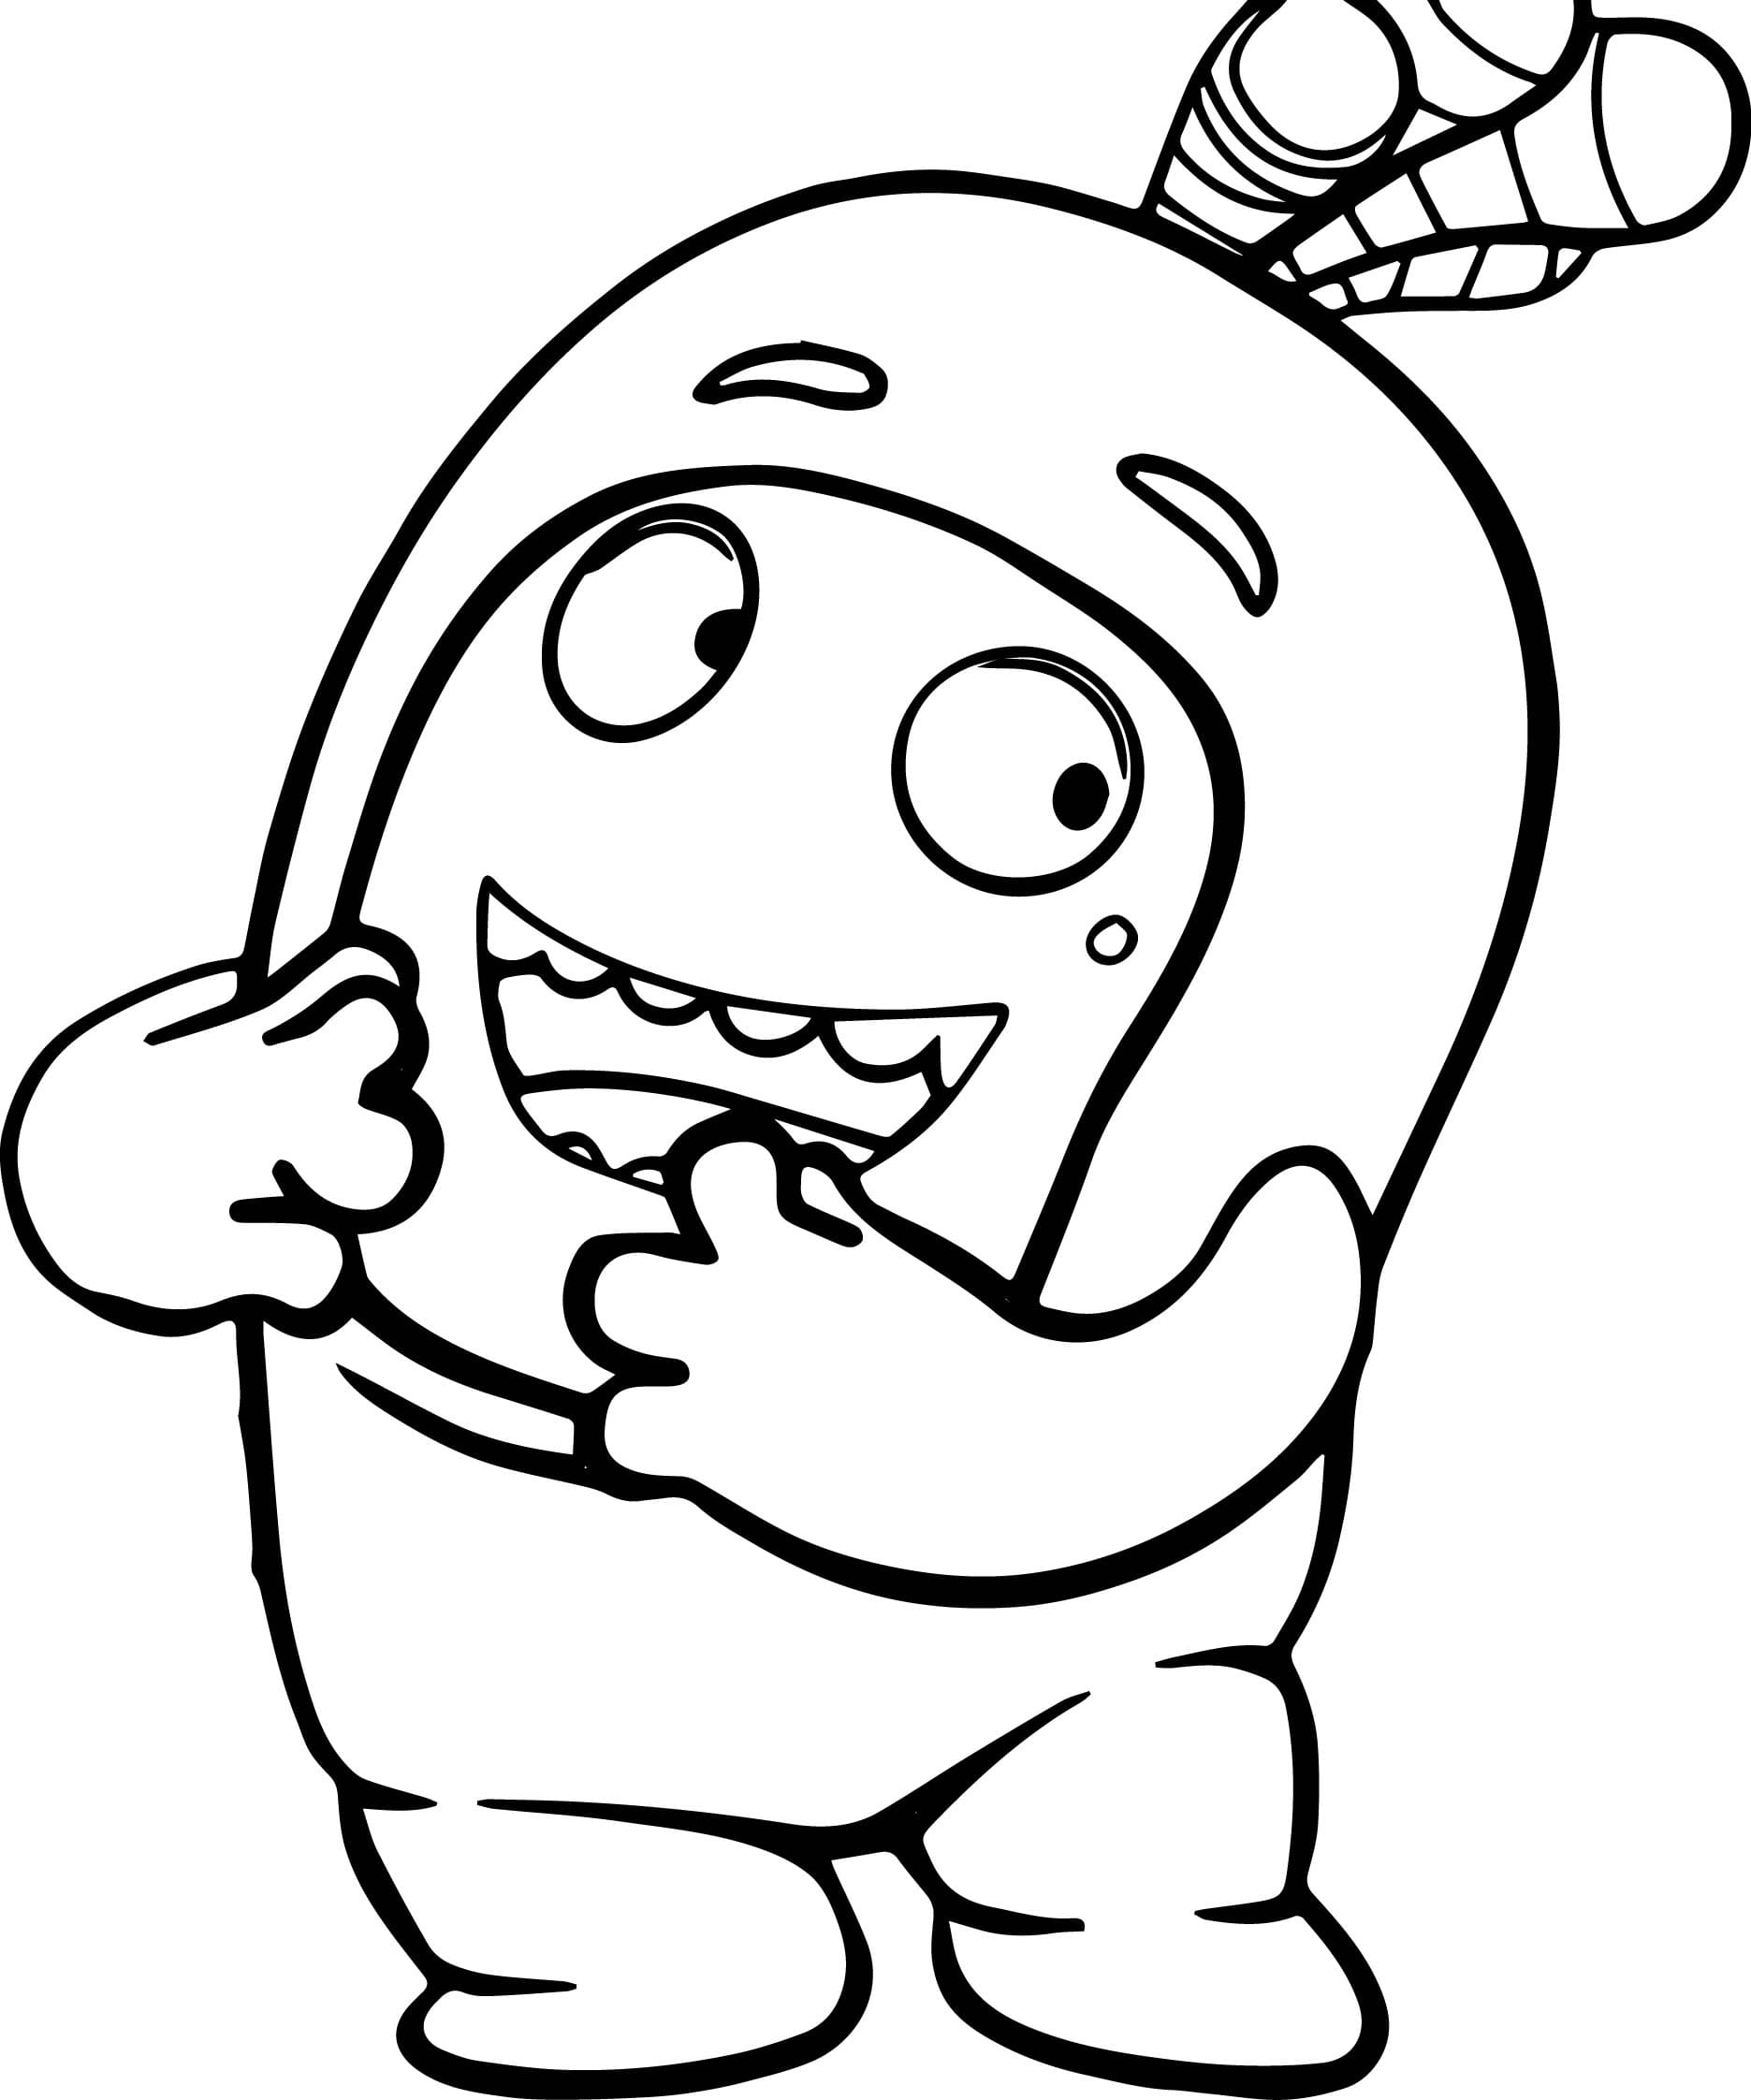 Funny Newt Coloring Page